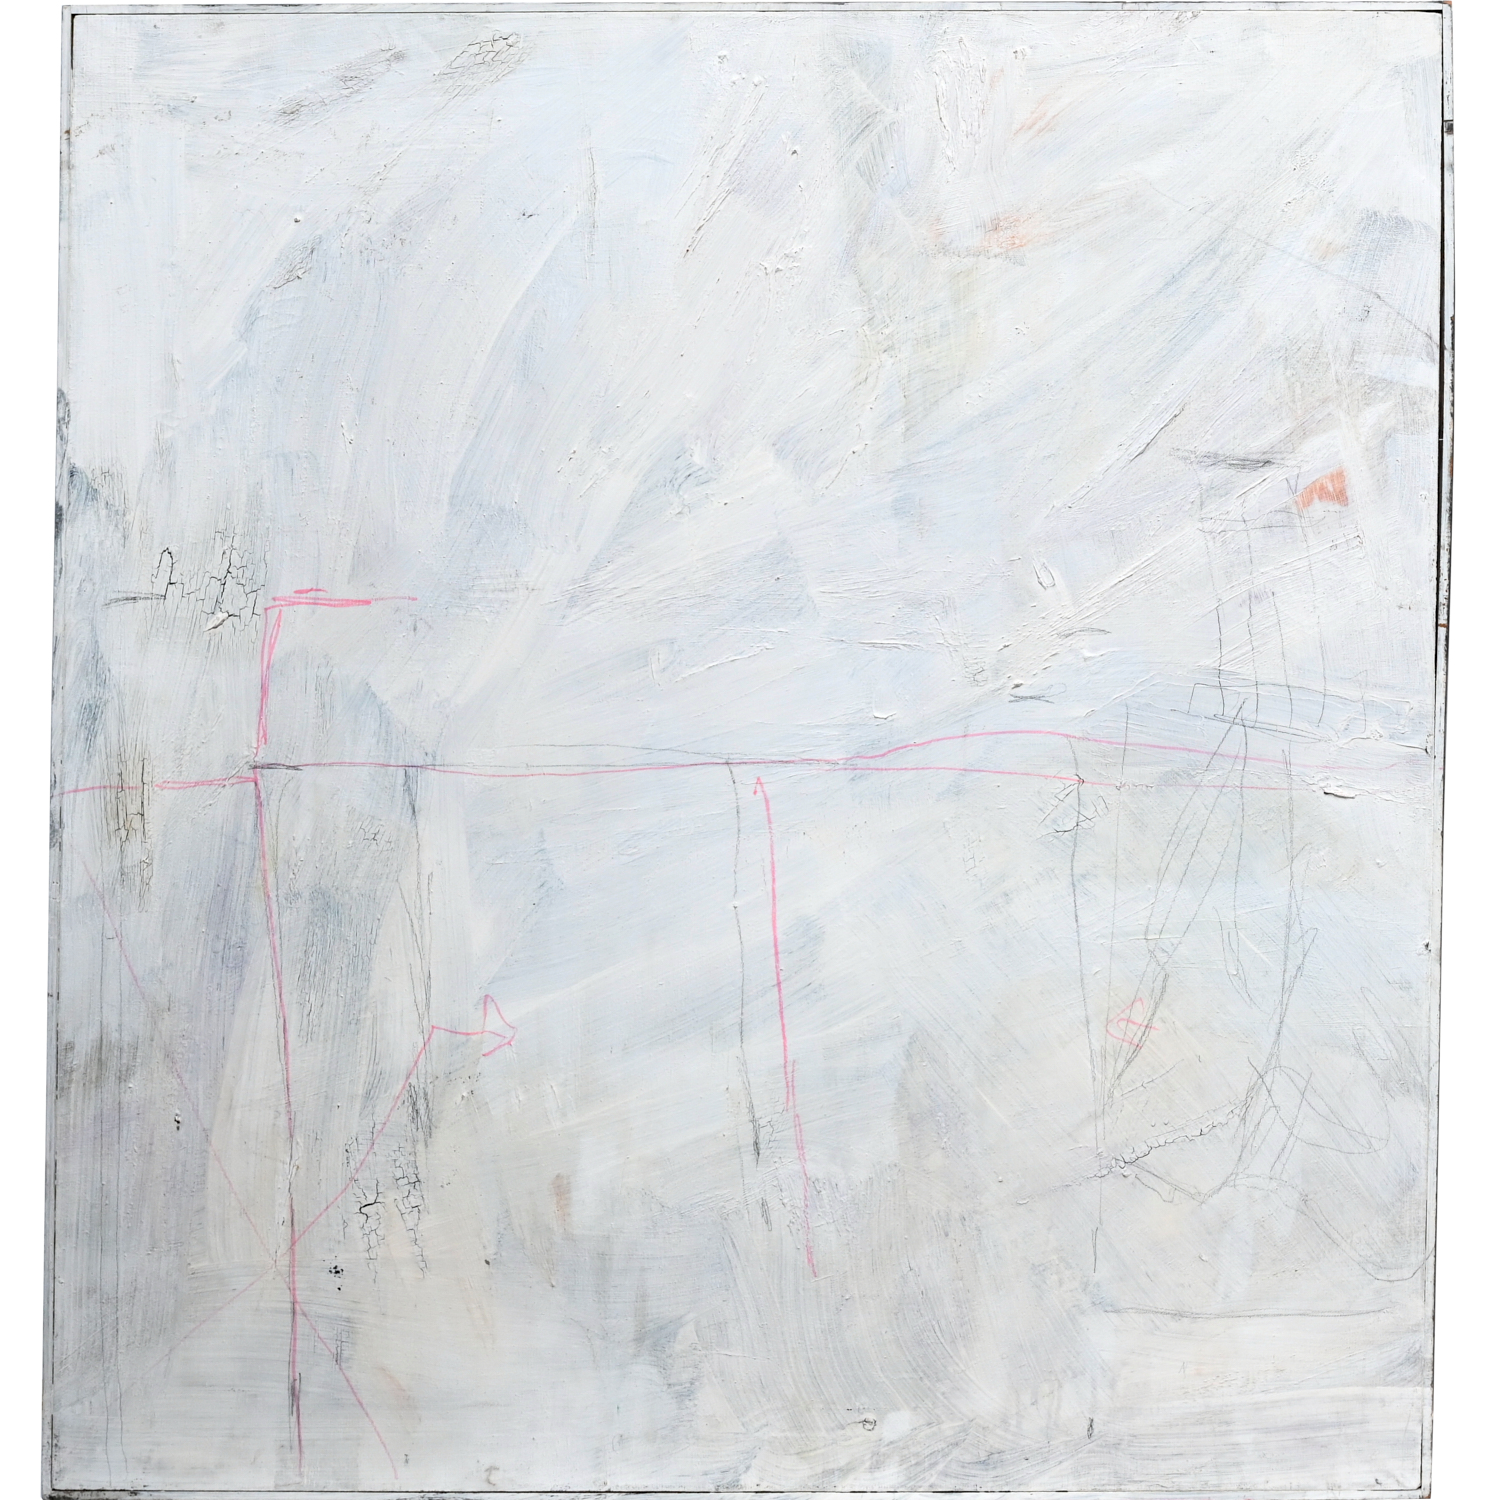 S. D. PEARLMAN, LARGE SCALE ABSTRACT